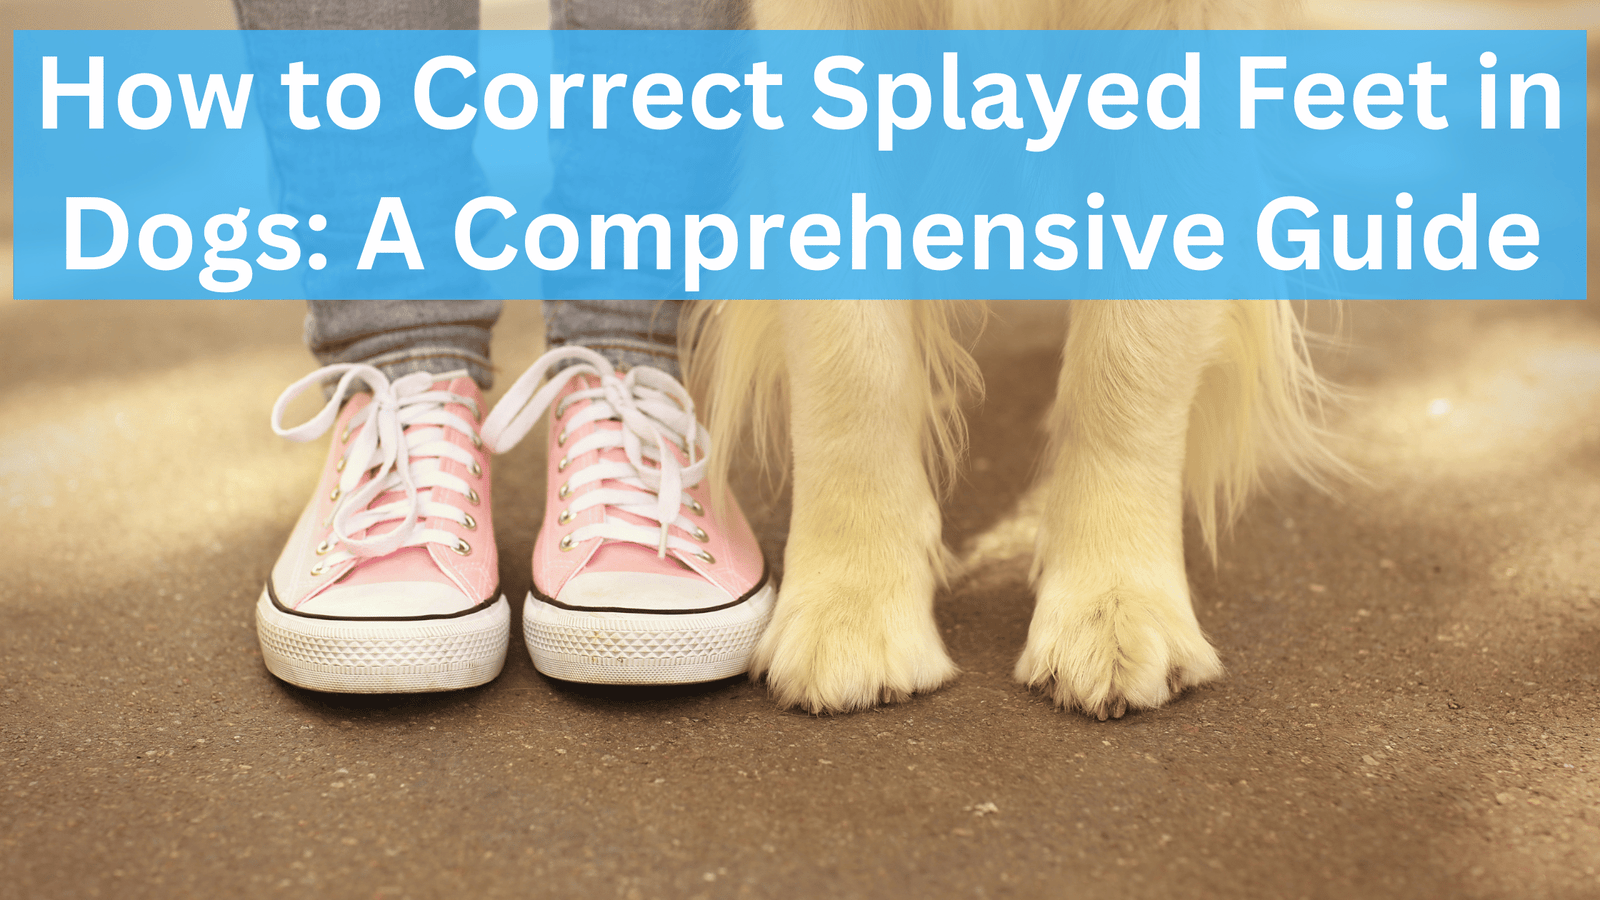 How to Correct Splayed Feet in Dogs: A Comprehensive Guide